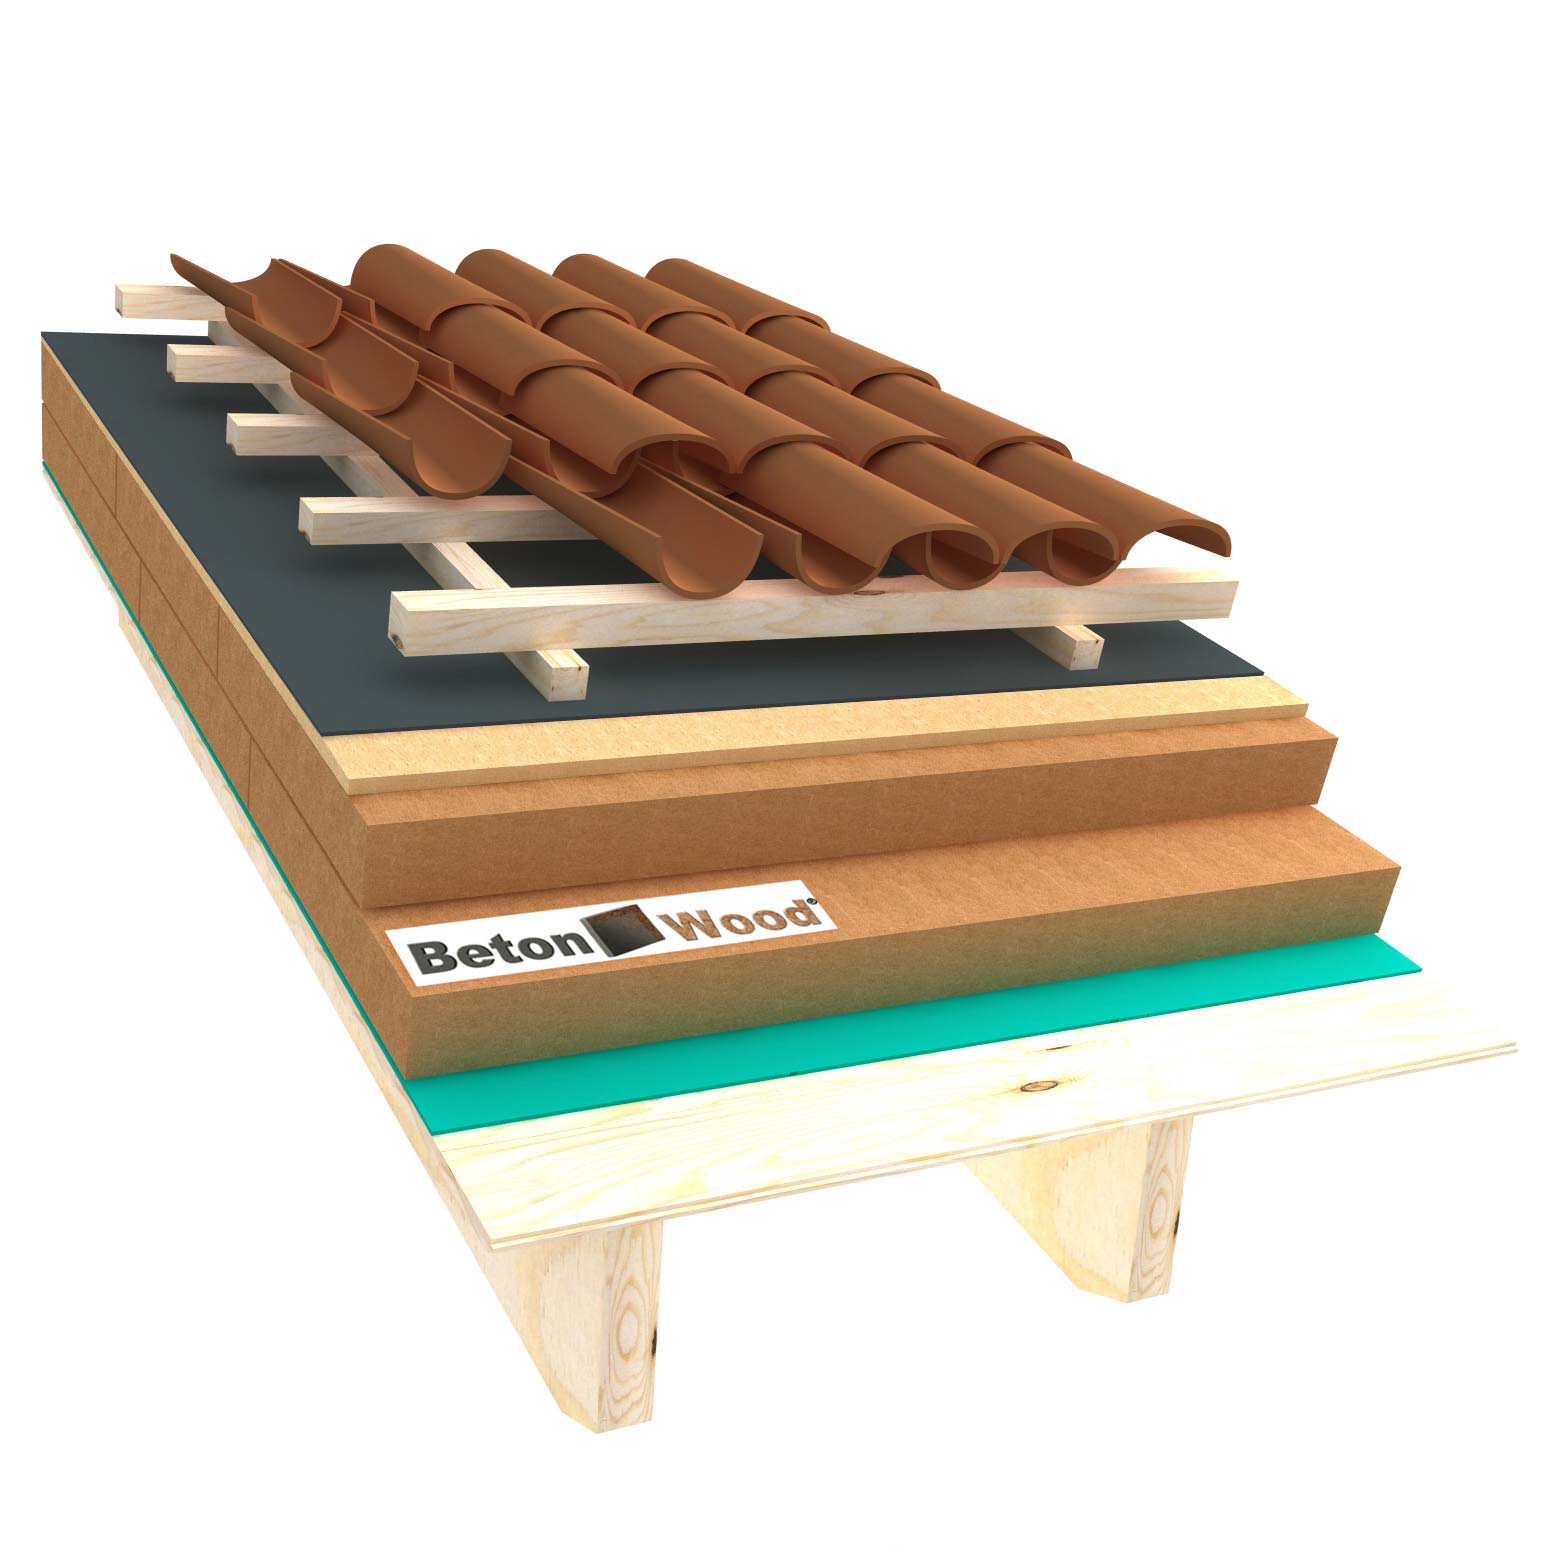 Ventilated roof with wood fiber Isorel and Therm SD on matchboarding